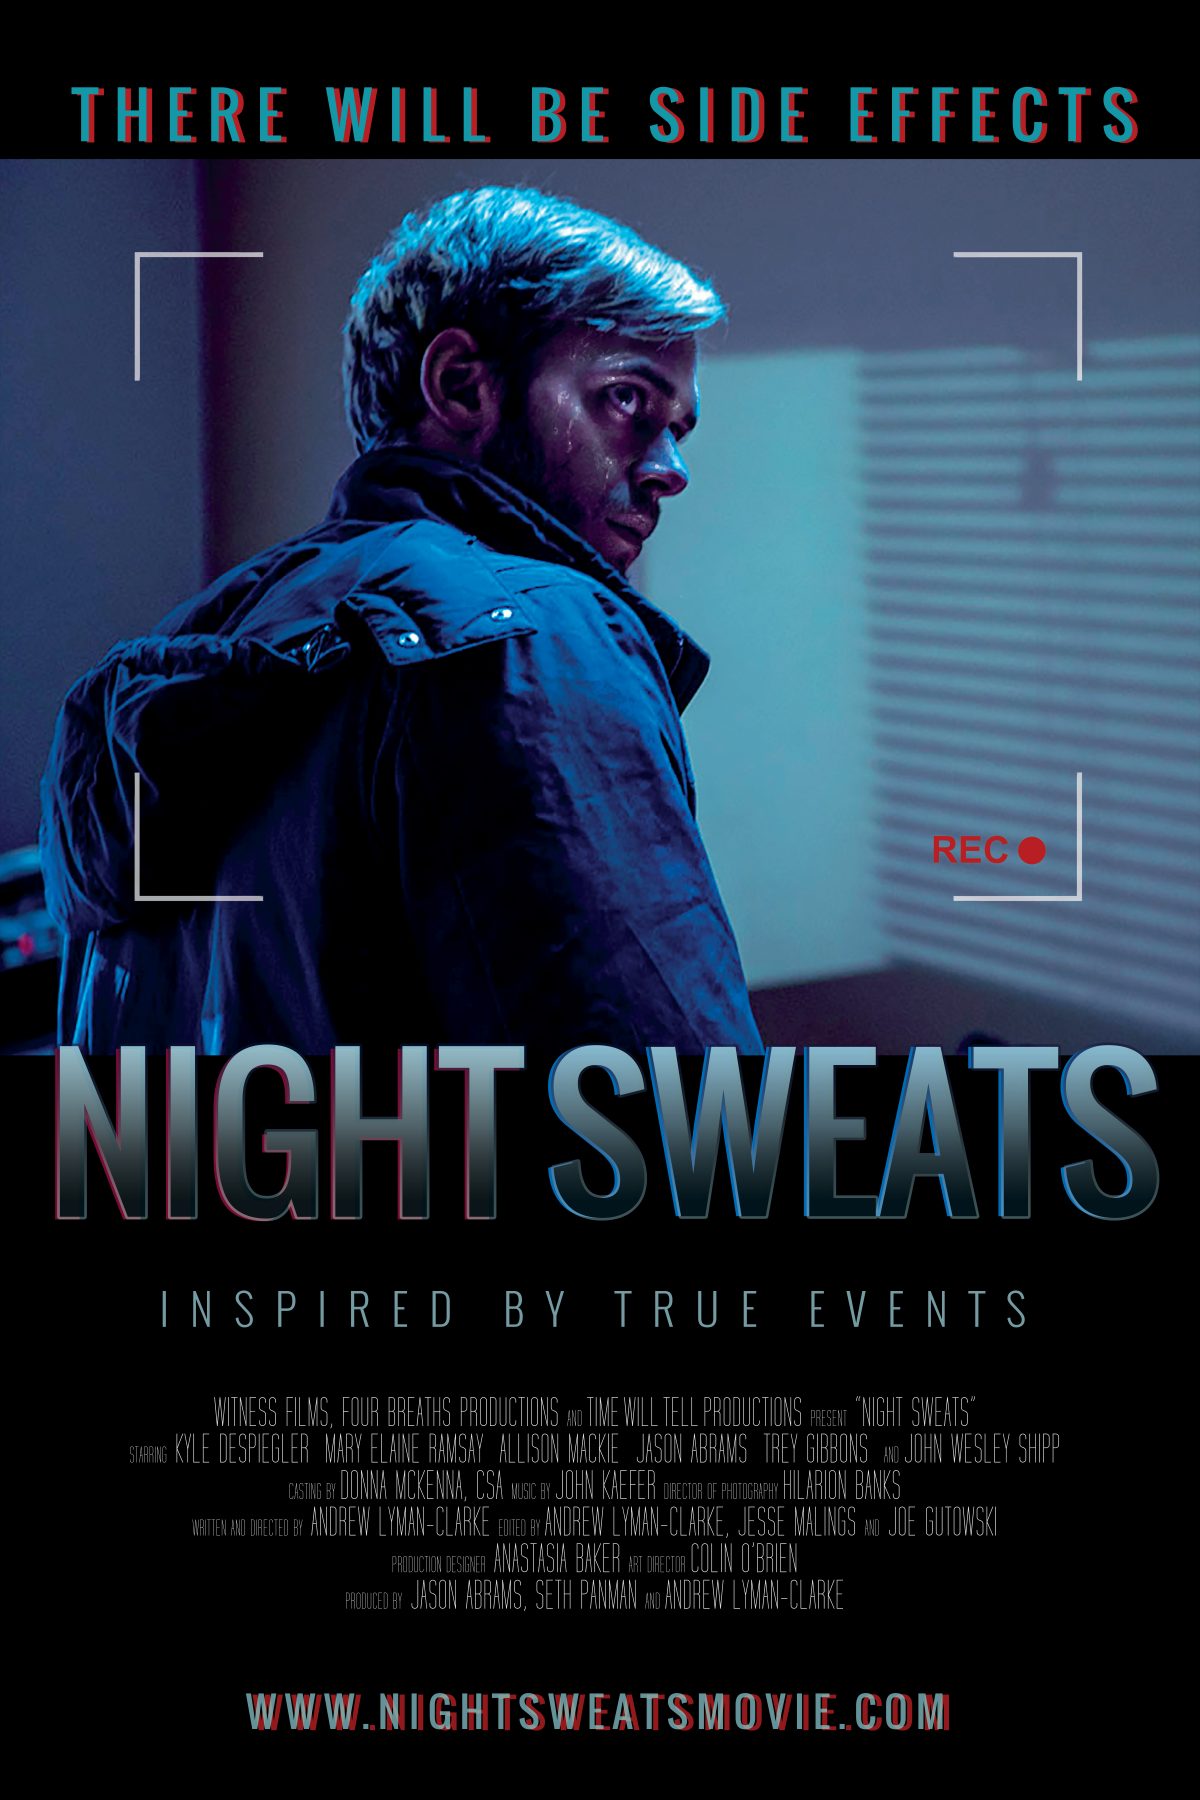 [News] Thriller NIGHT SWEATS Available on VOD This November